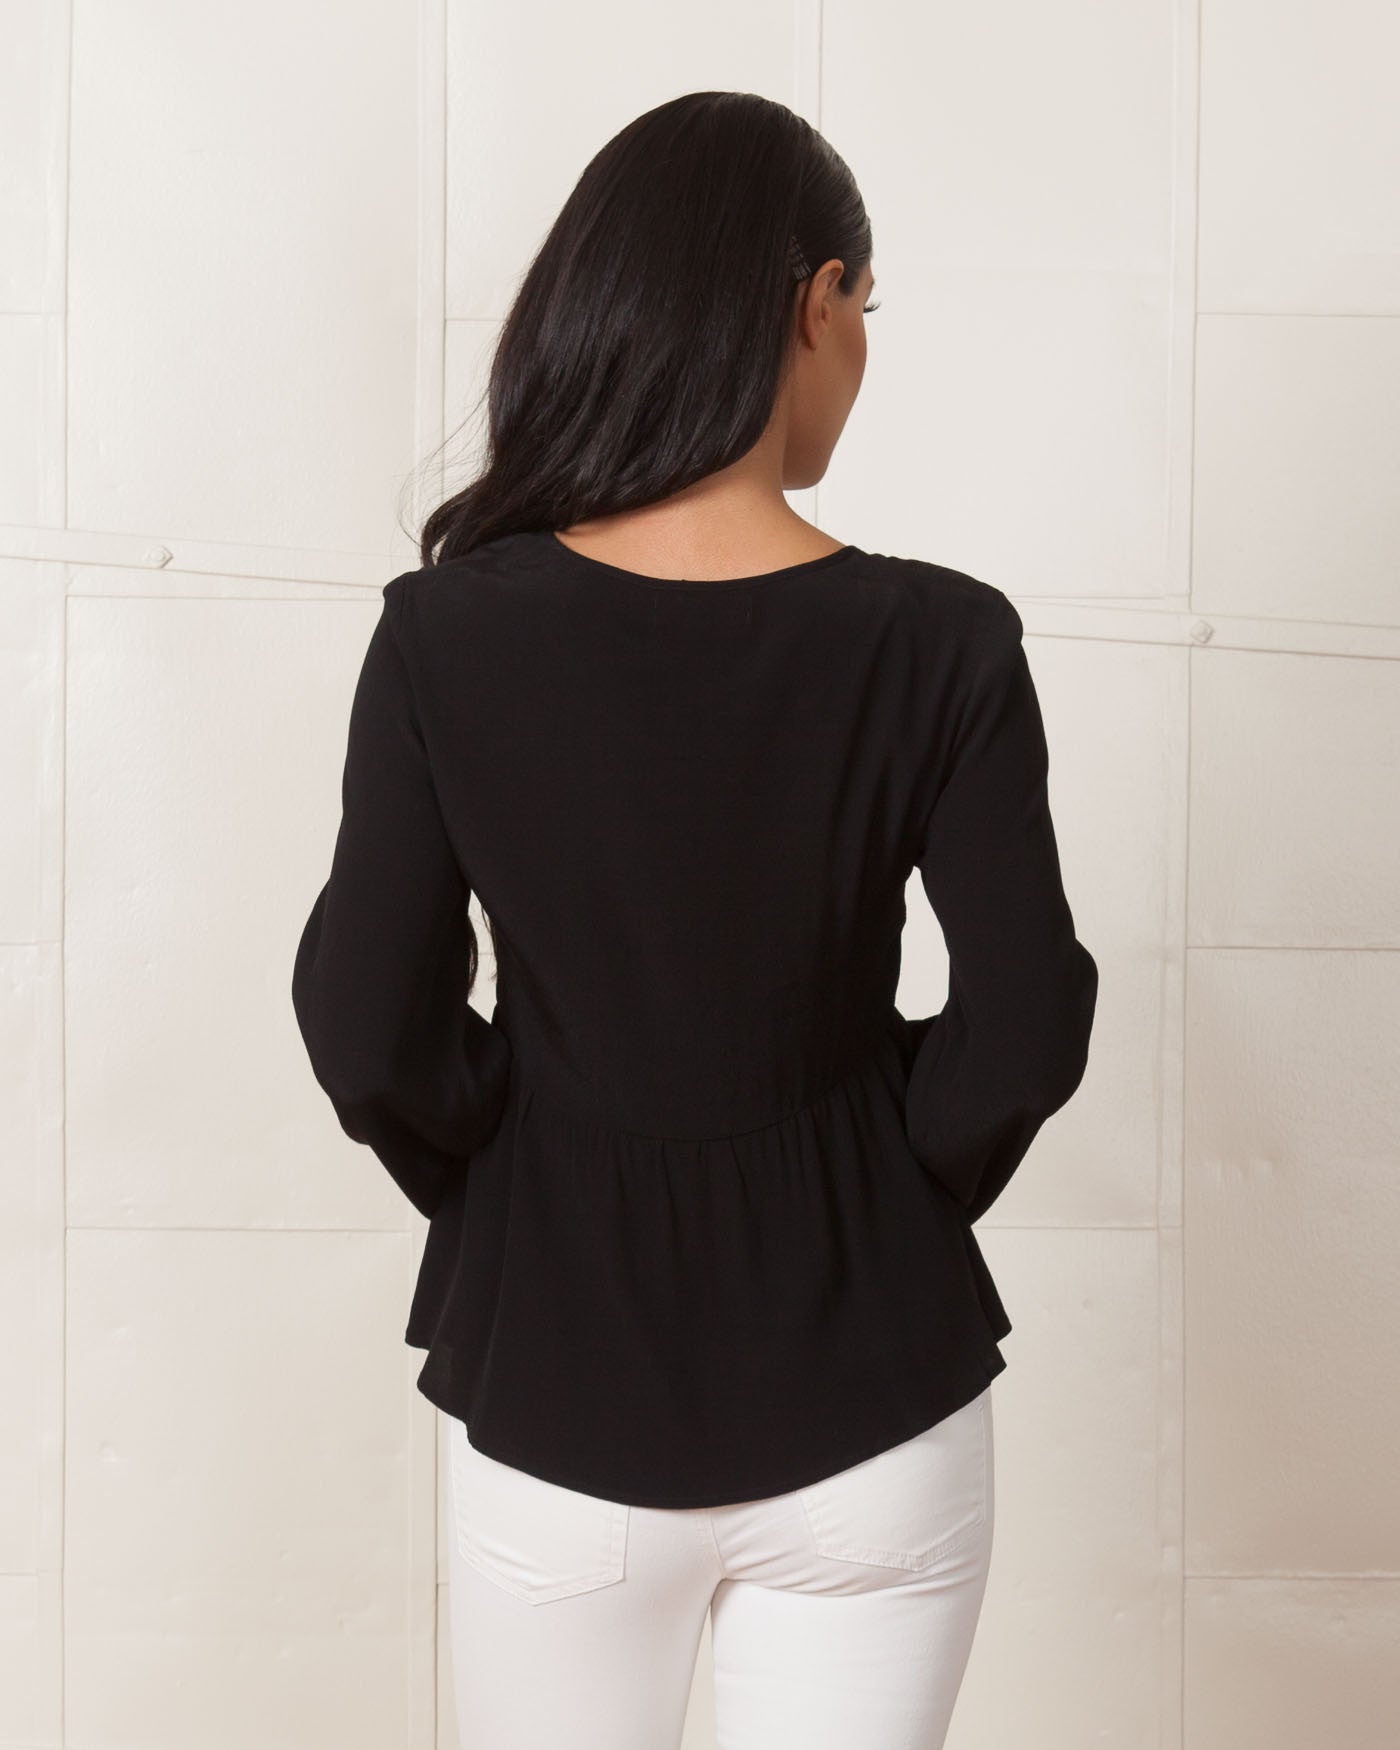 MINKPINK Stand By Me Black Blouse